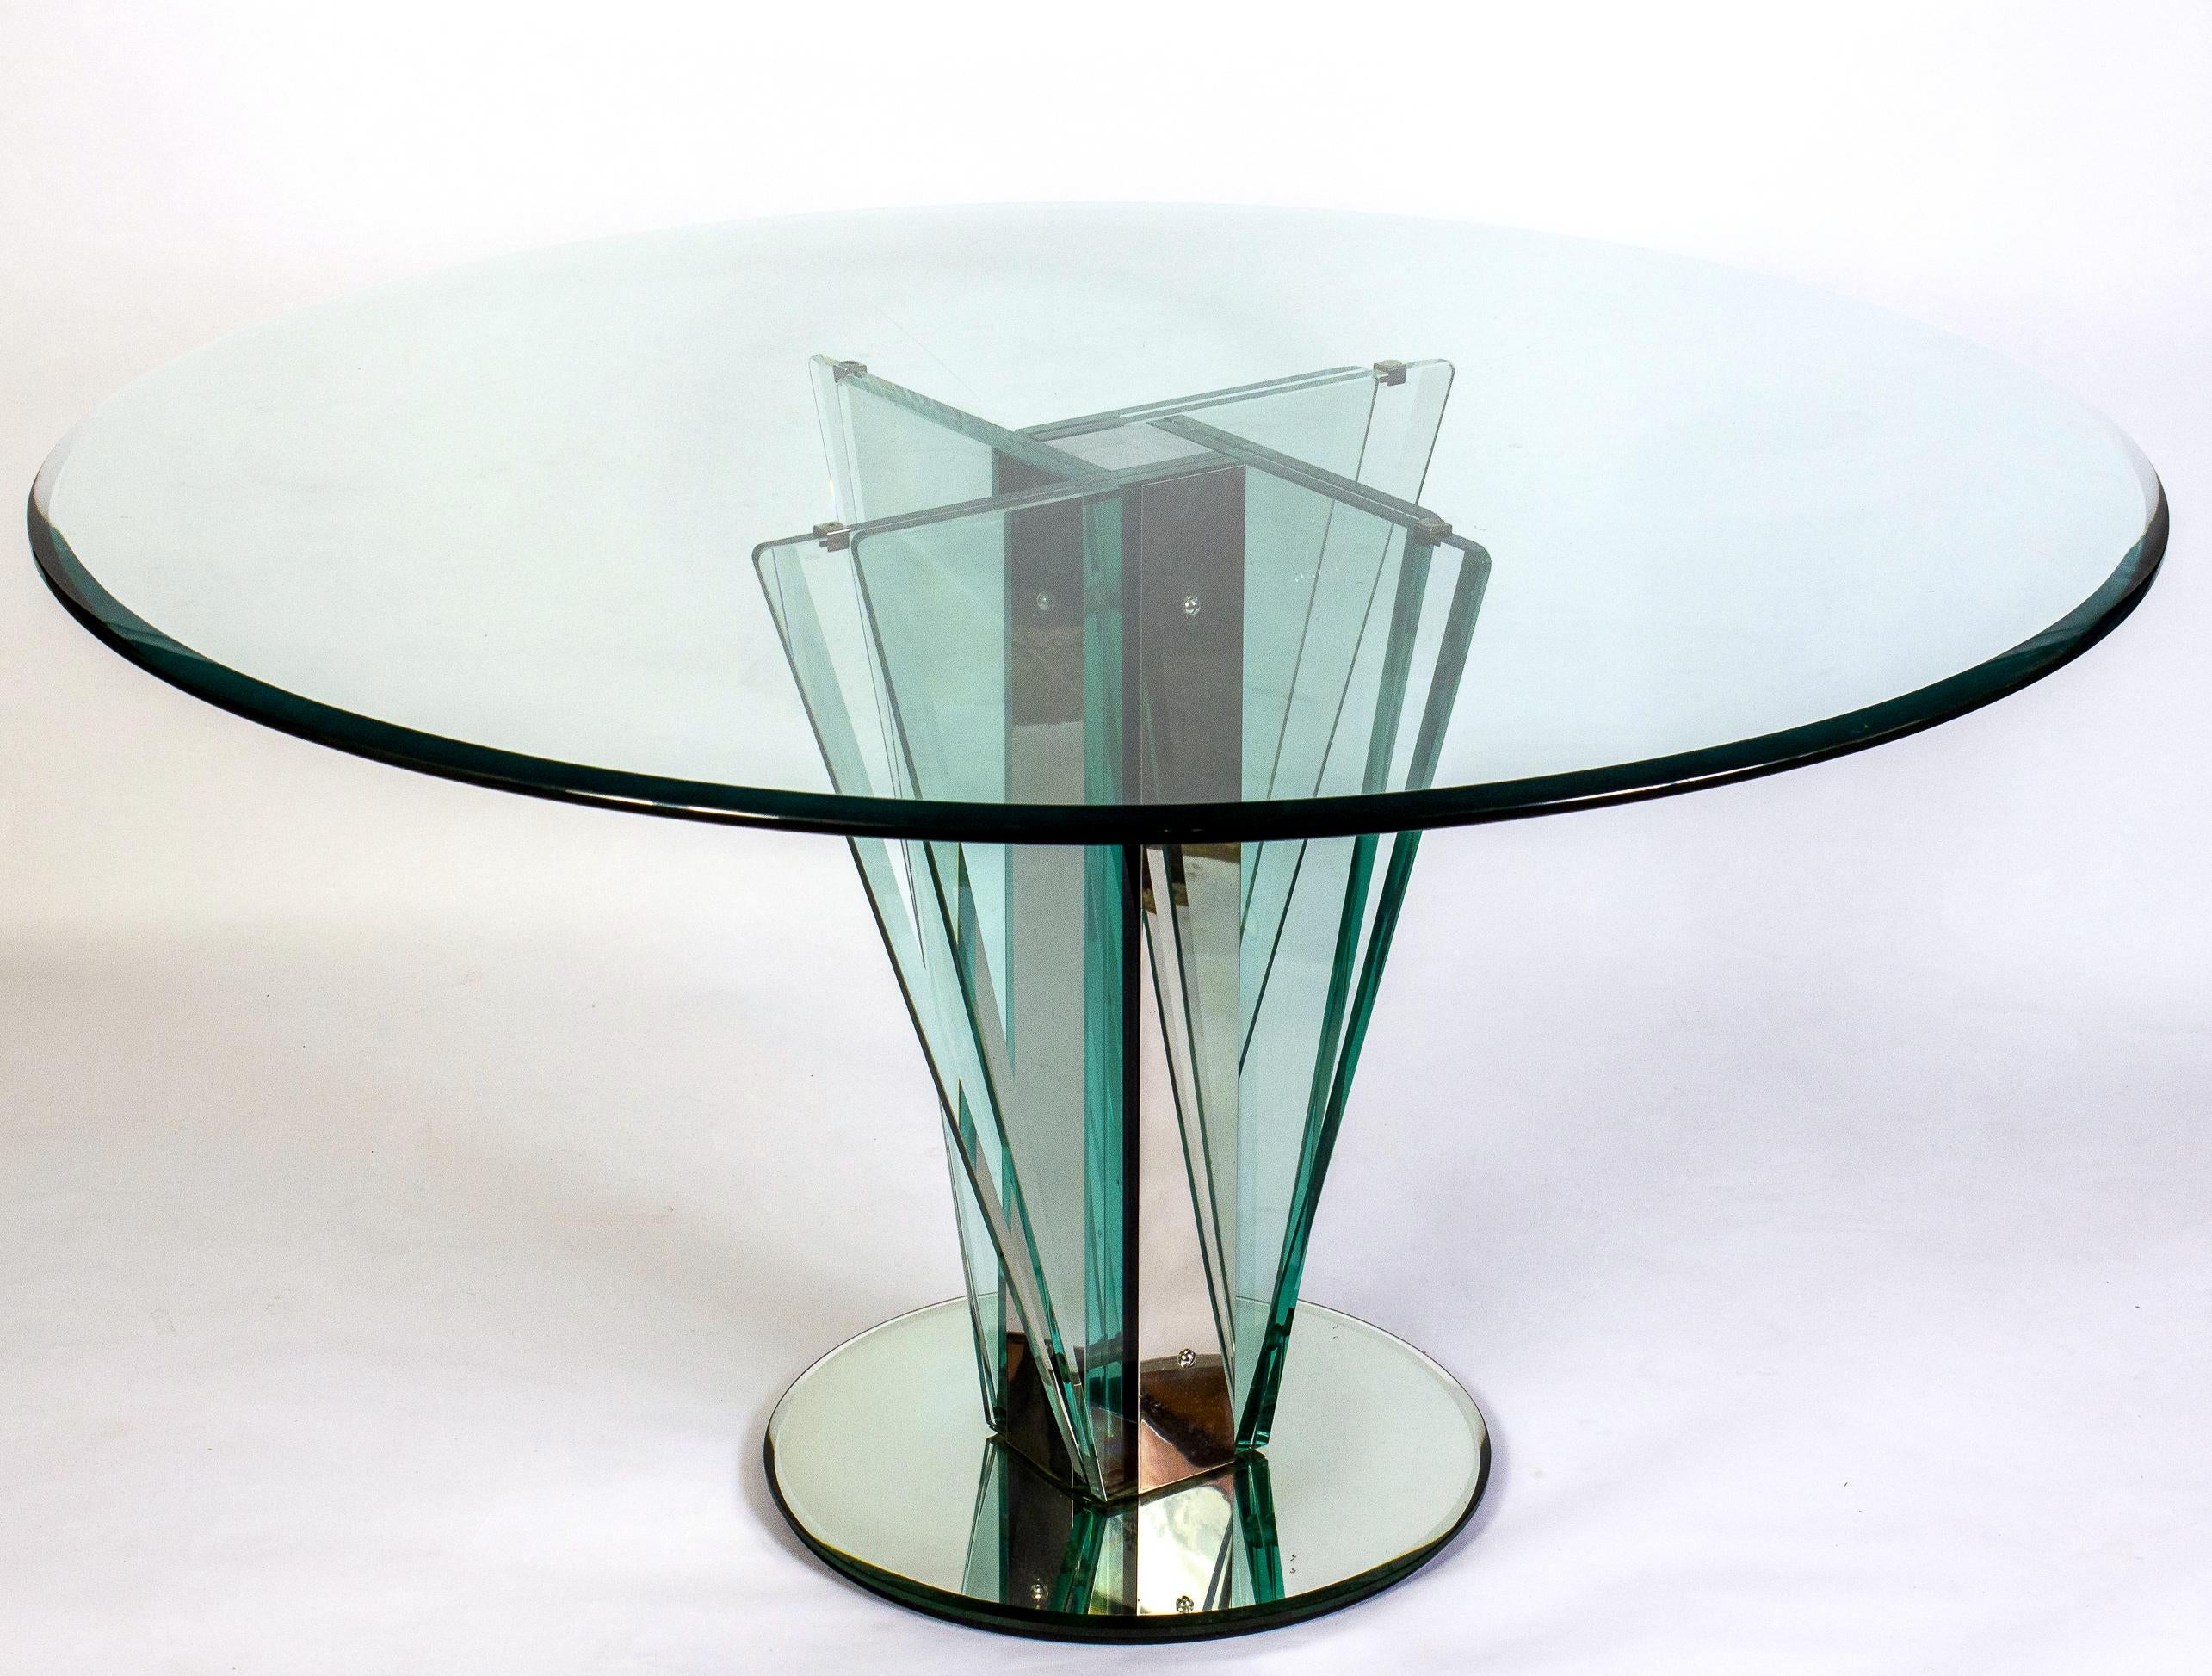 Italy, 1940s-1950s.
This outstanding table is made with thick green Nile glass, a typical feature of Fontana Arte's pieces.
Elegant design geometric center leg on a mirrored glass round base.
Excellent original vintage condition.
Can be used as